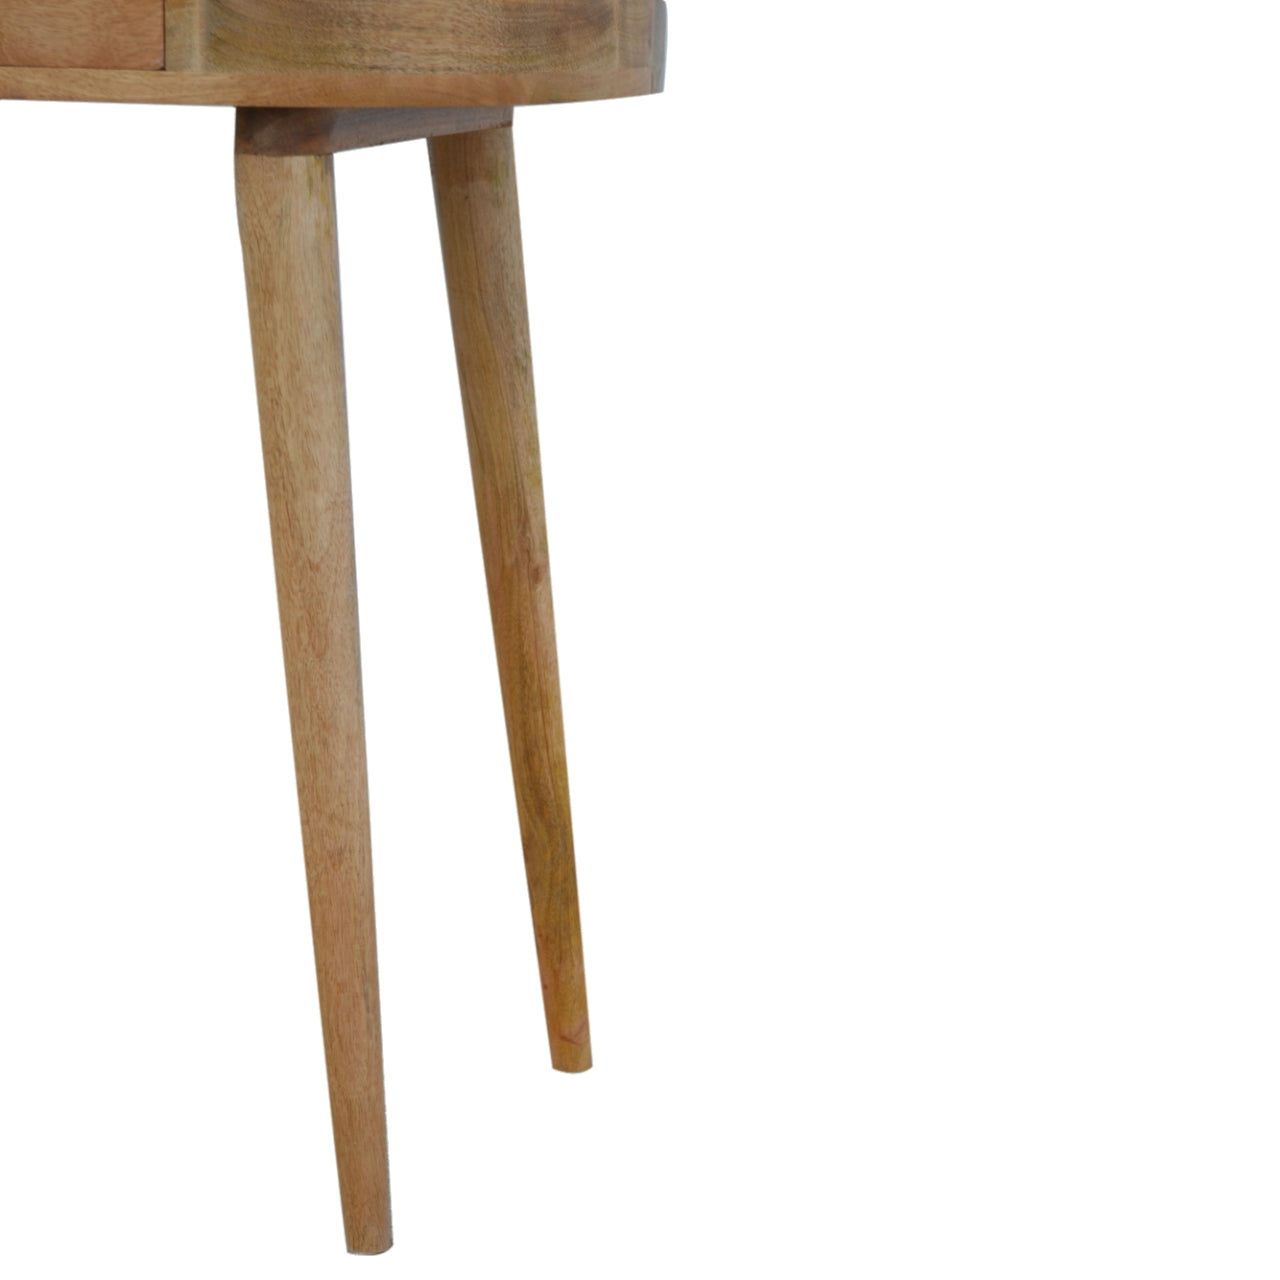 Solid Wood Rounded Console Table